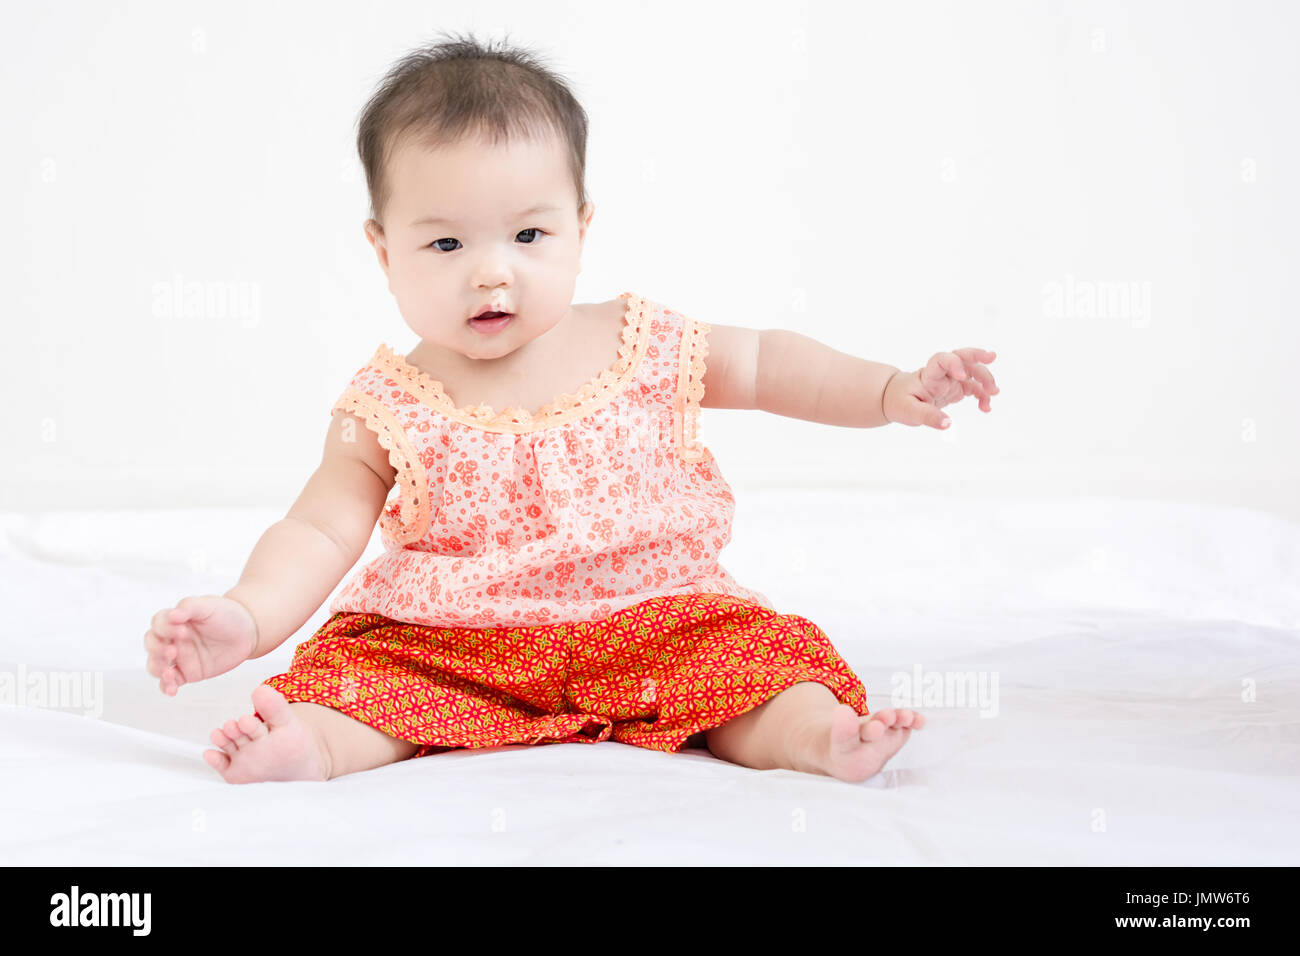 Portrait of a little adorable infant baby girl sitting on the bed and ...